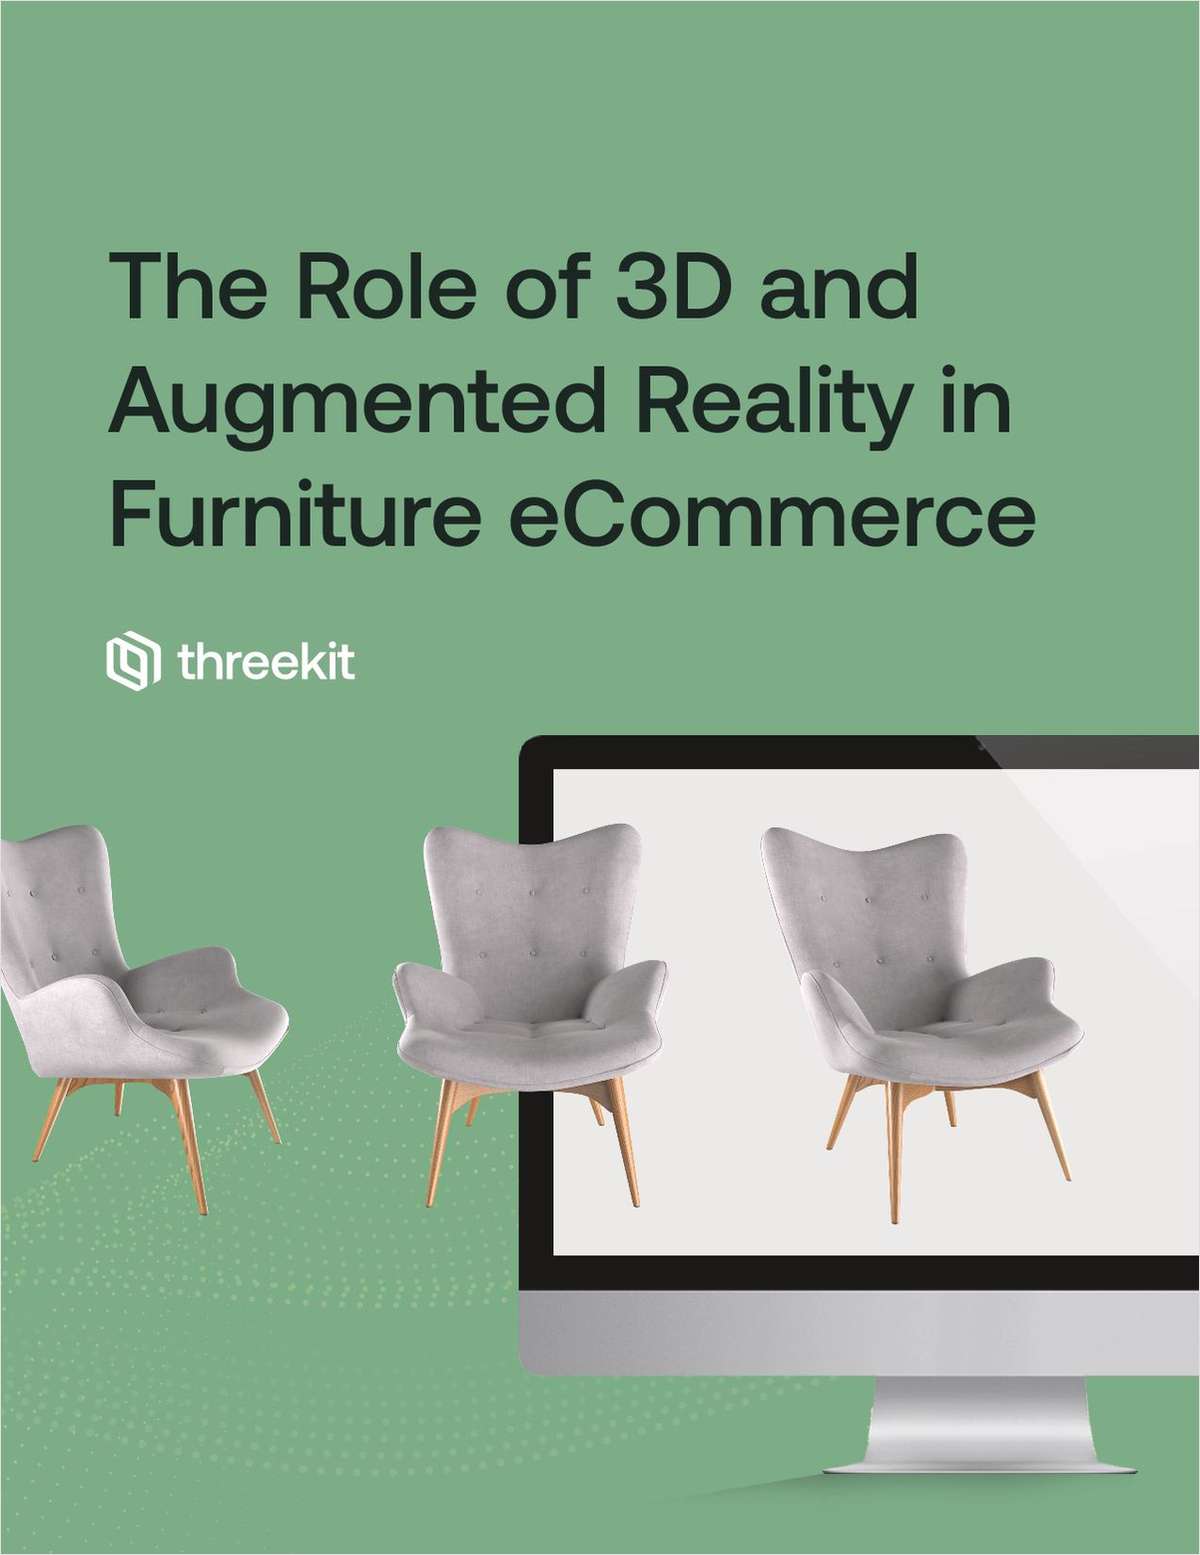 The Role of 3D and Augmented Reality in Furniture eCommerce